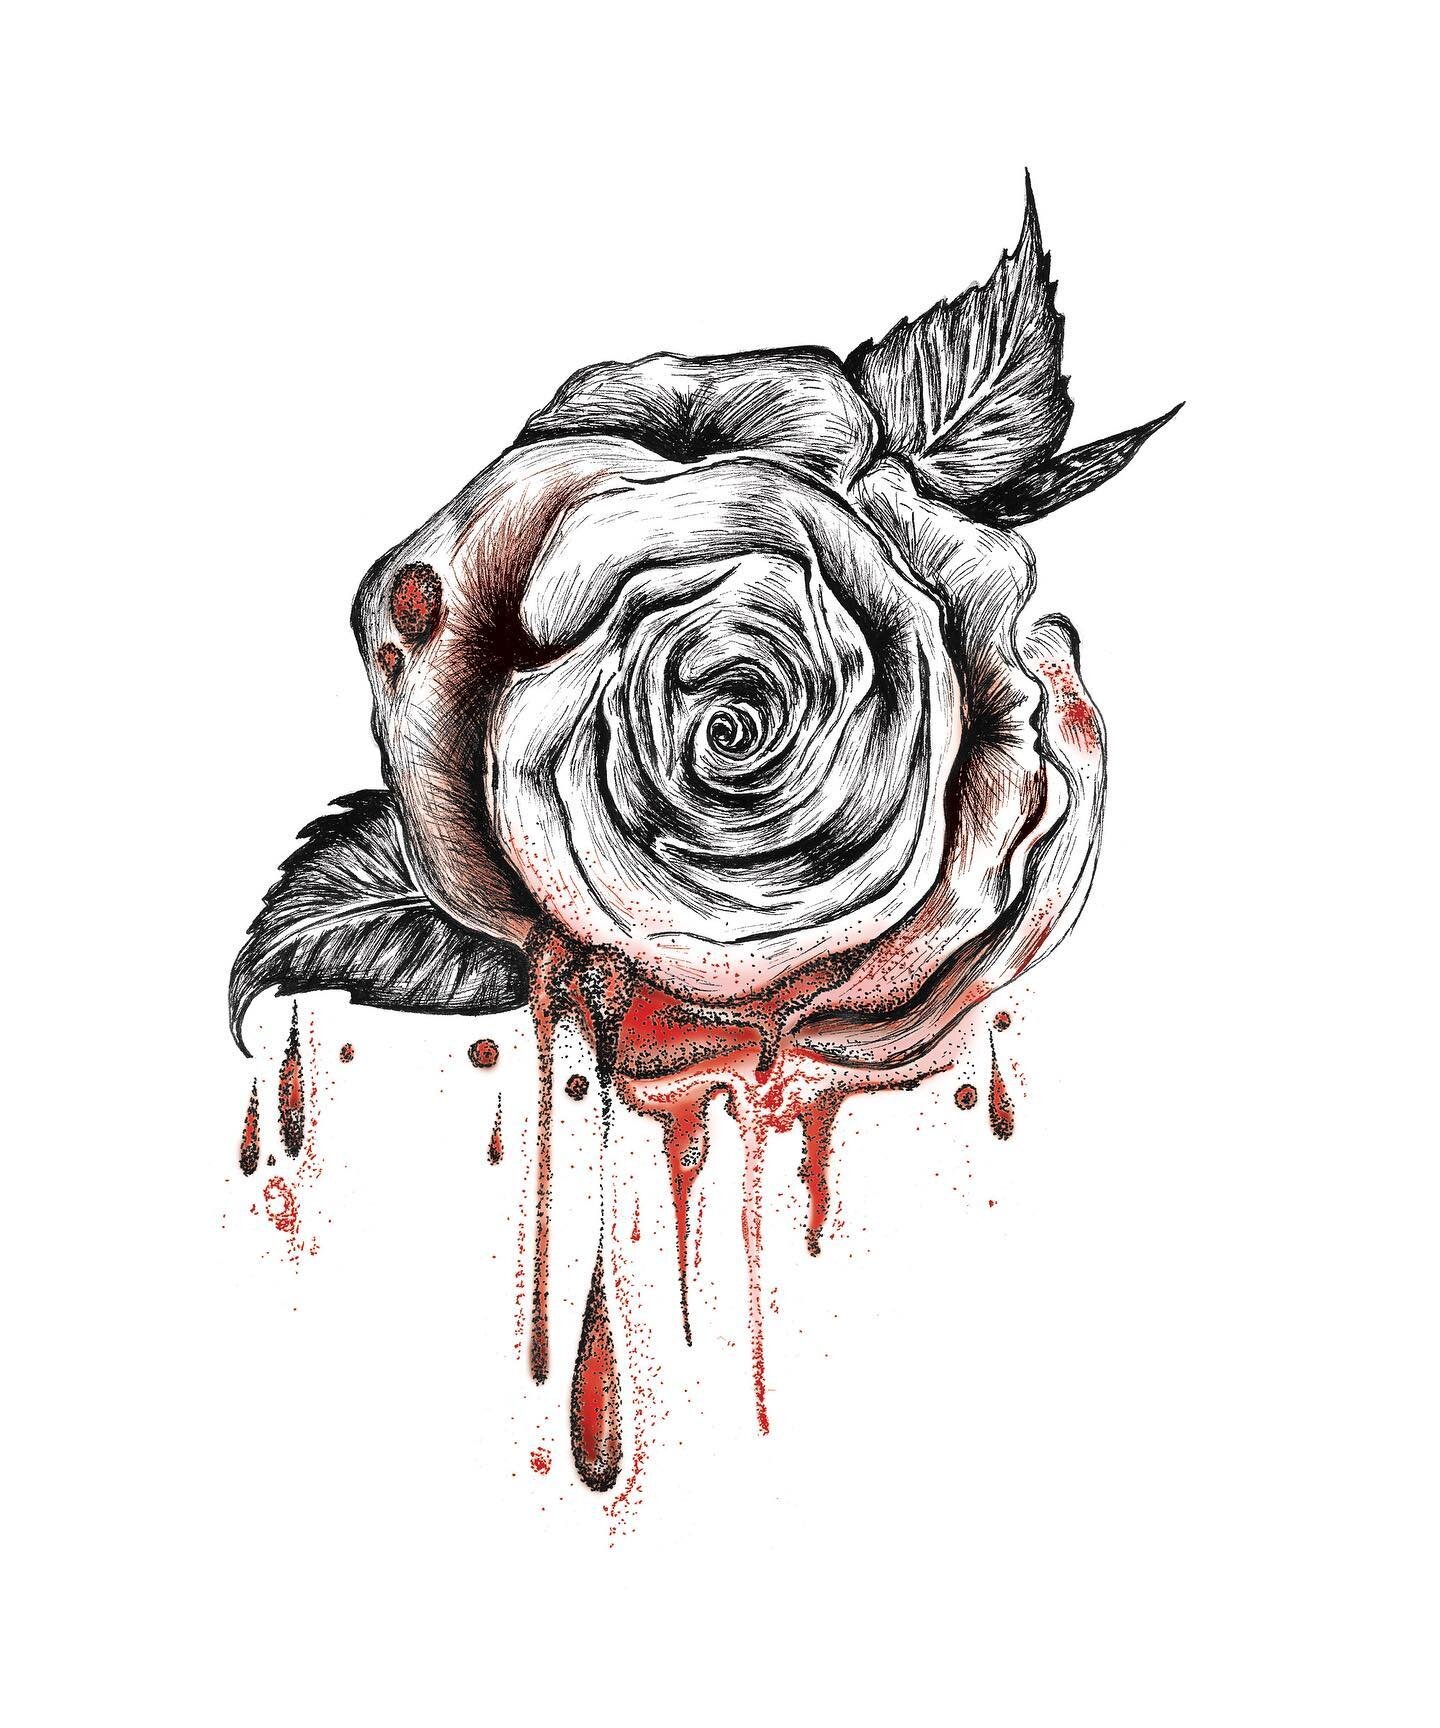 I love to draw in pen &amp; ink! How would you describe my style? Comment below. 

 

 

 

#hootdesignstudio 
#customart #rose #rosetattoo #roseart 
#illustration #sketchbook #sketching #artwork #traditionalart #tattoodesign #tattooideas #inkdrawing